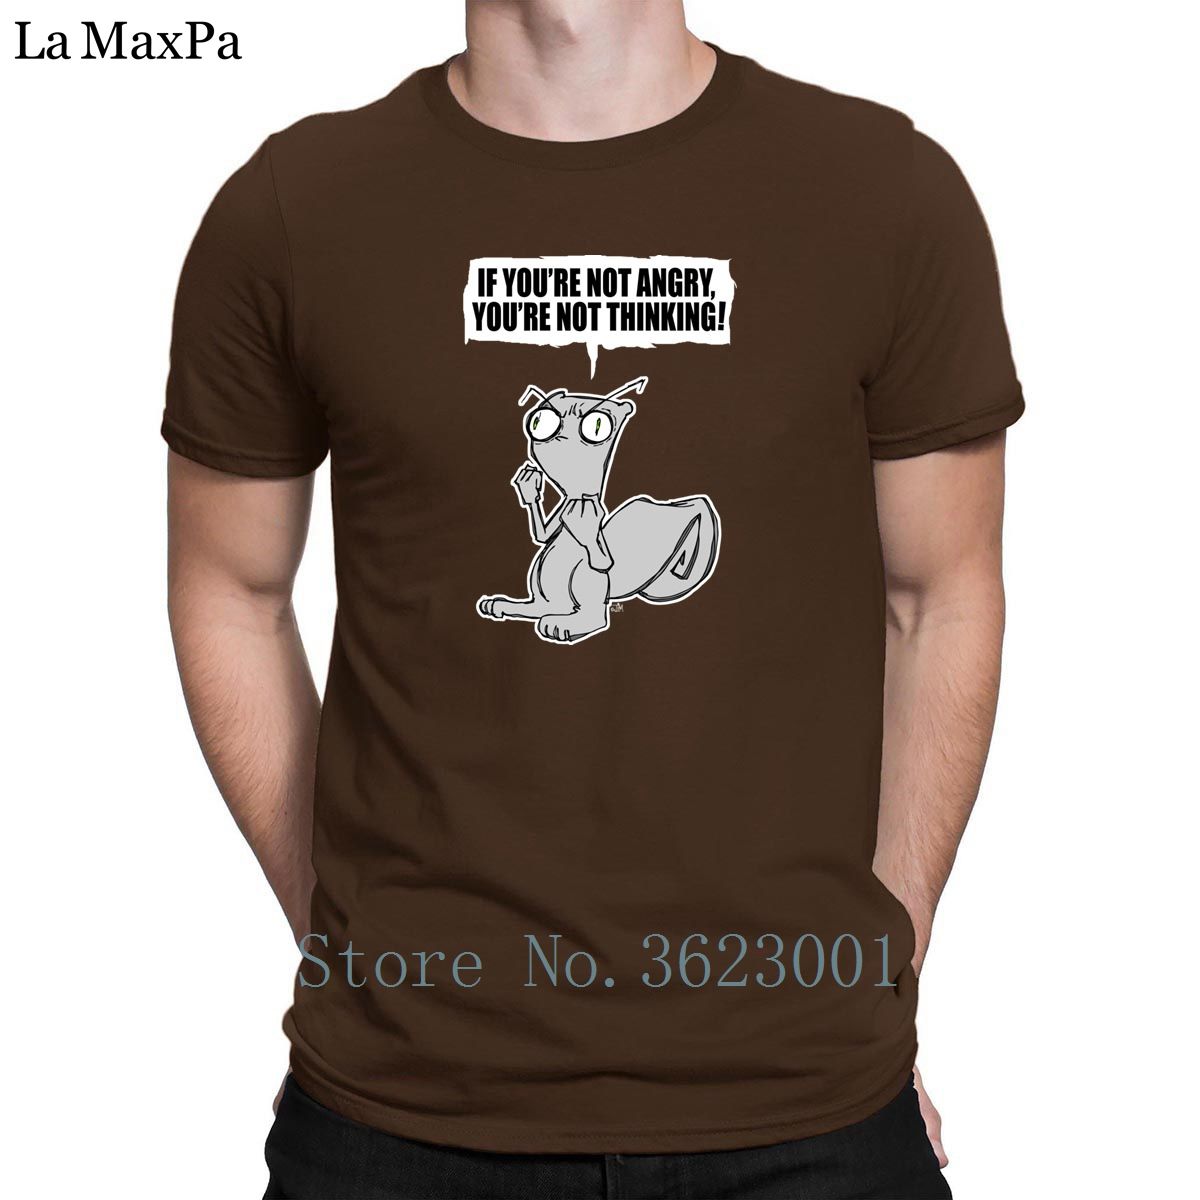 Custom Fun Tshirt If Youre Not Angry Foamy The Squirrel T Shirt Cheap Sale Standard Men T Shirt Building Homme Crew Neck Tee Shirts Online Cool Tee Shirts From Dzuprightf 16 15 Dhgate Com